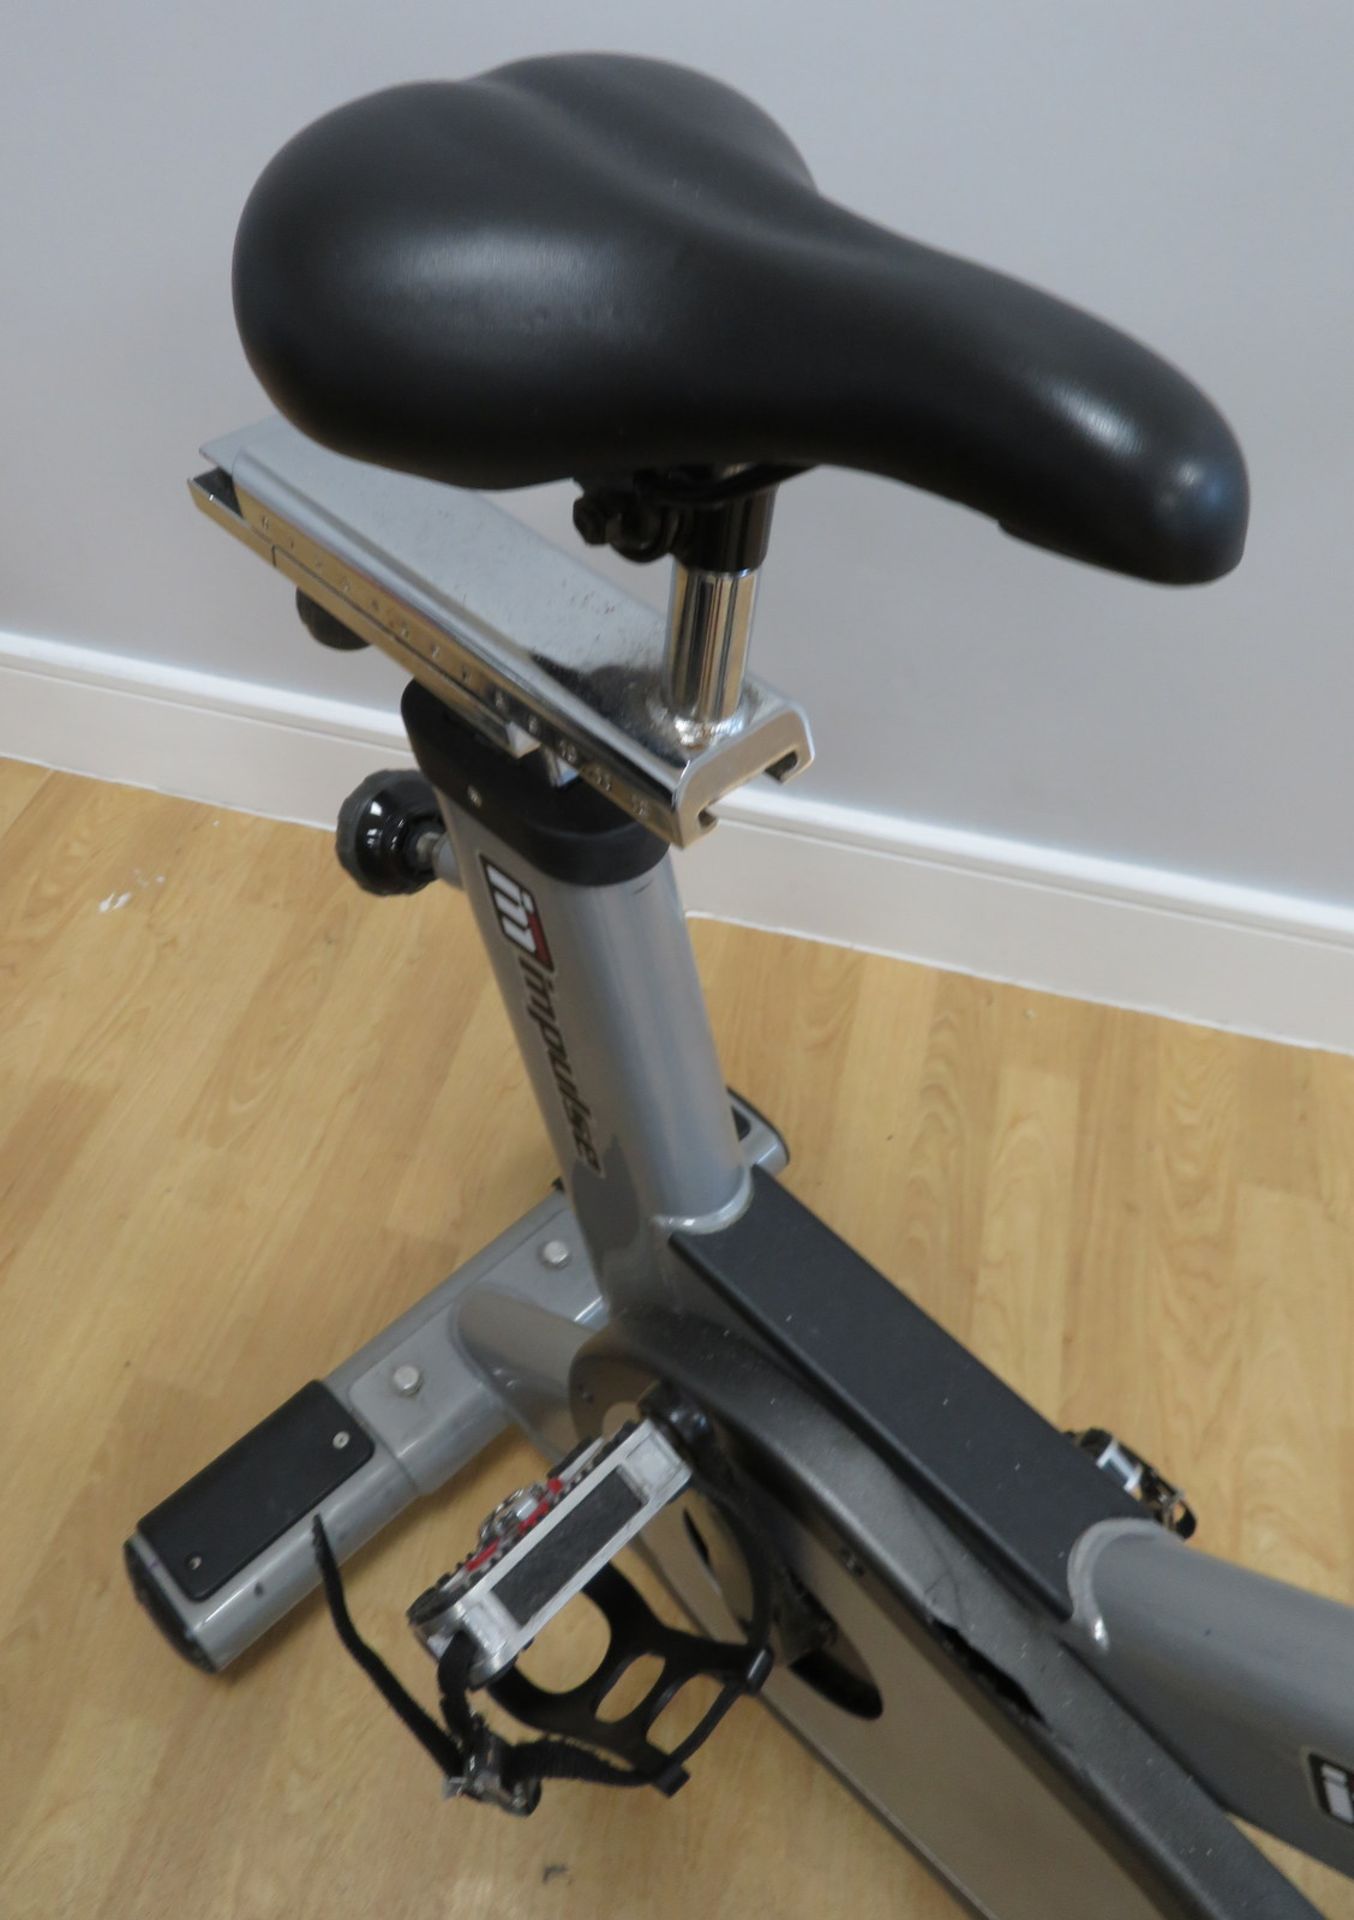 2x Impulse Model: PS300D Spin Bike With Digital Console. Adjustable Seat & Handle Bars. Di - Image 11 of 14